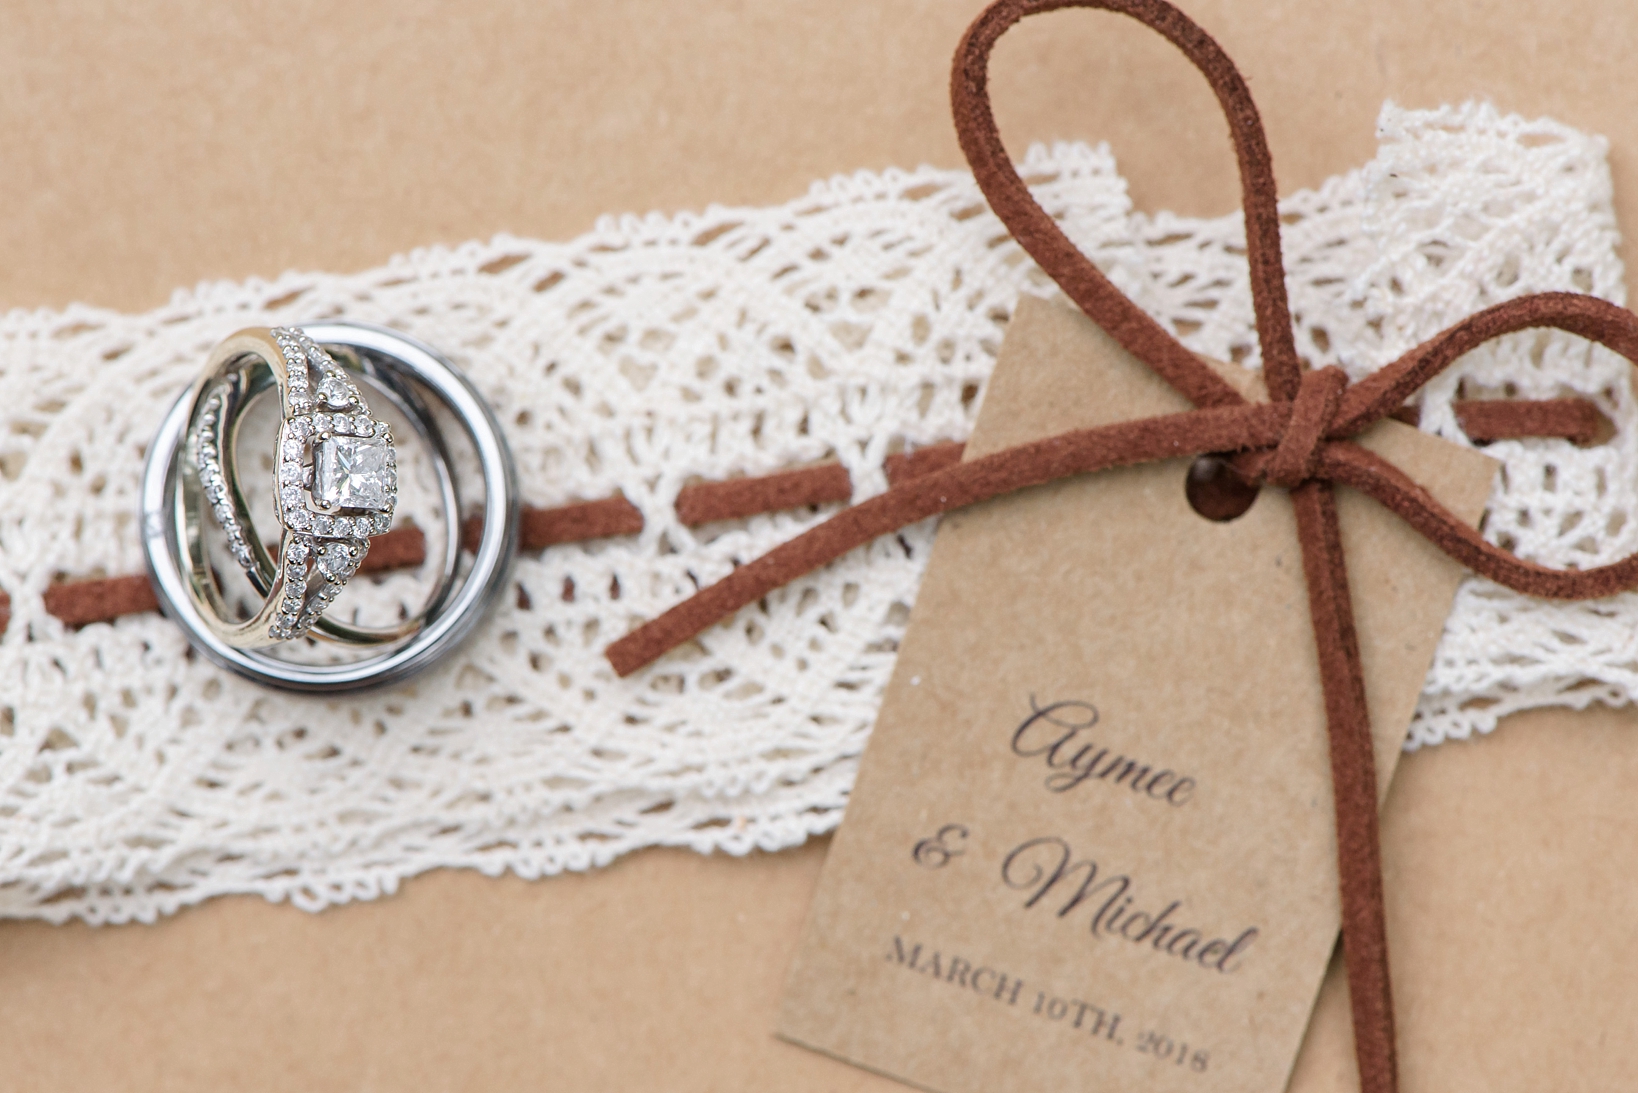 Wedding rings against white lace and leather string of the invite at a wedding in rural Tampa, FL